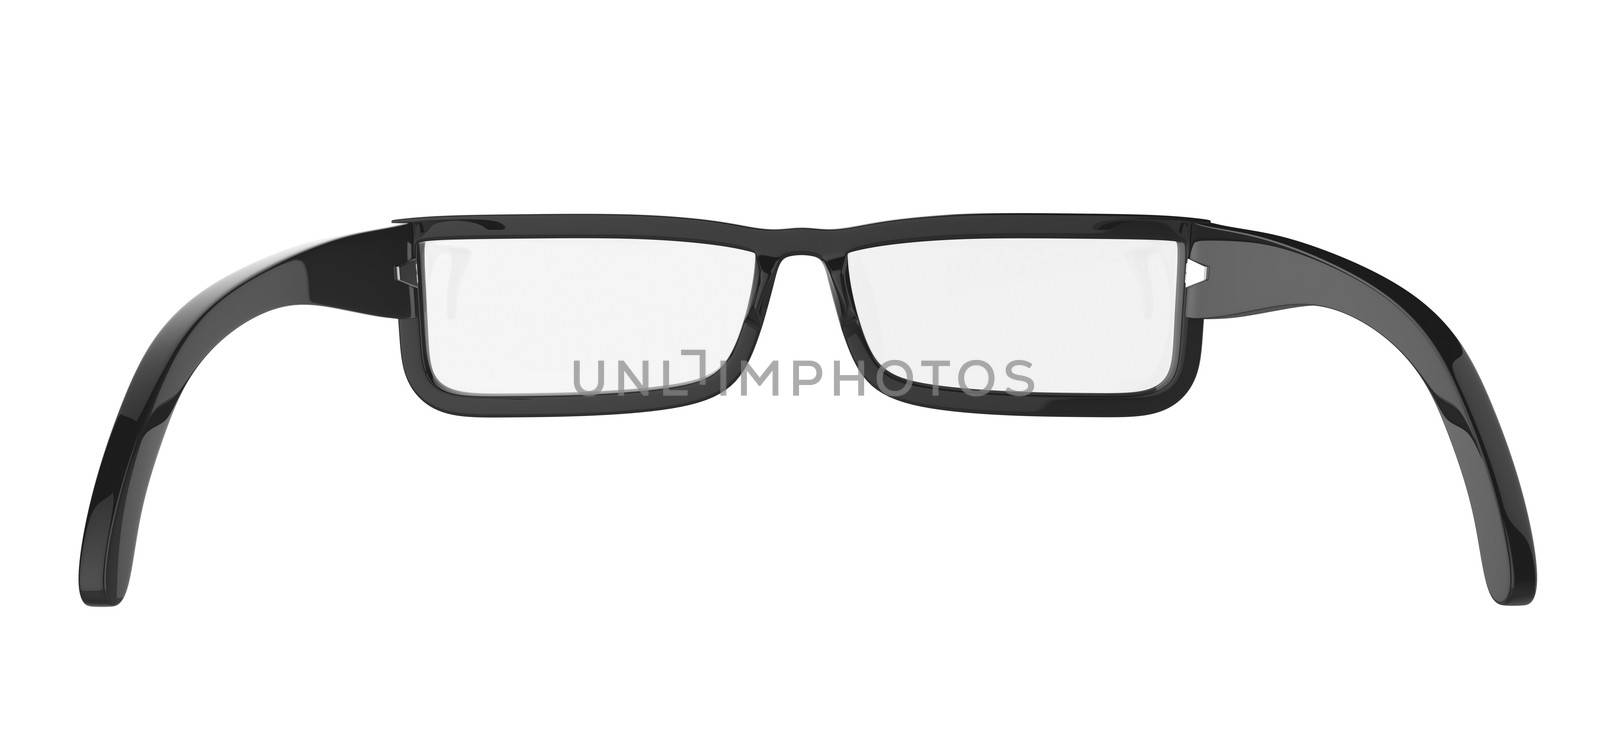 Eyeglasses by magraphics